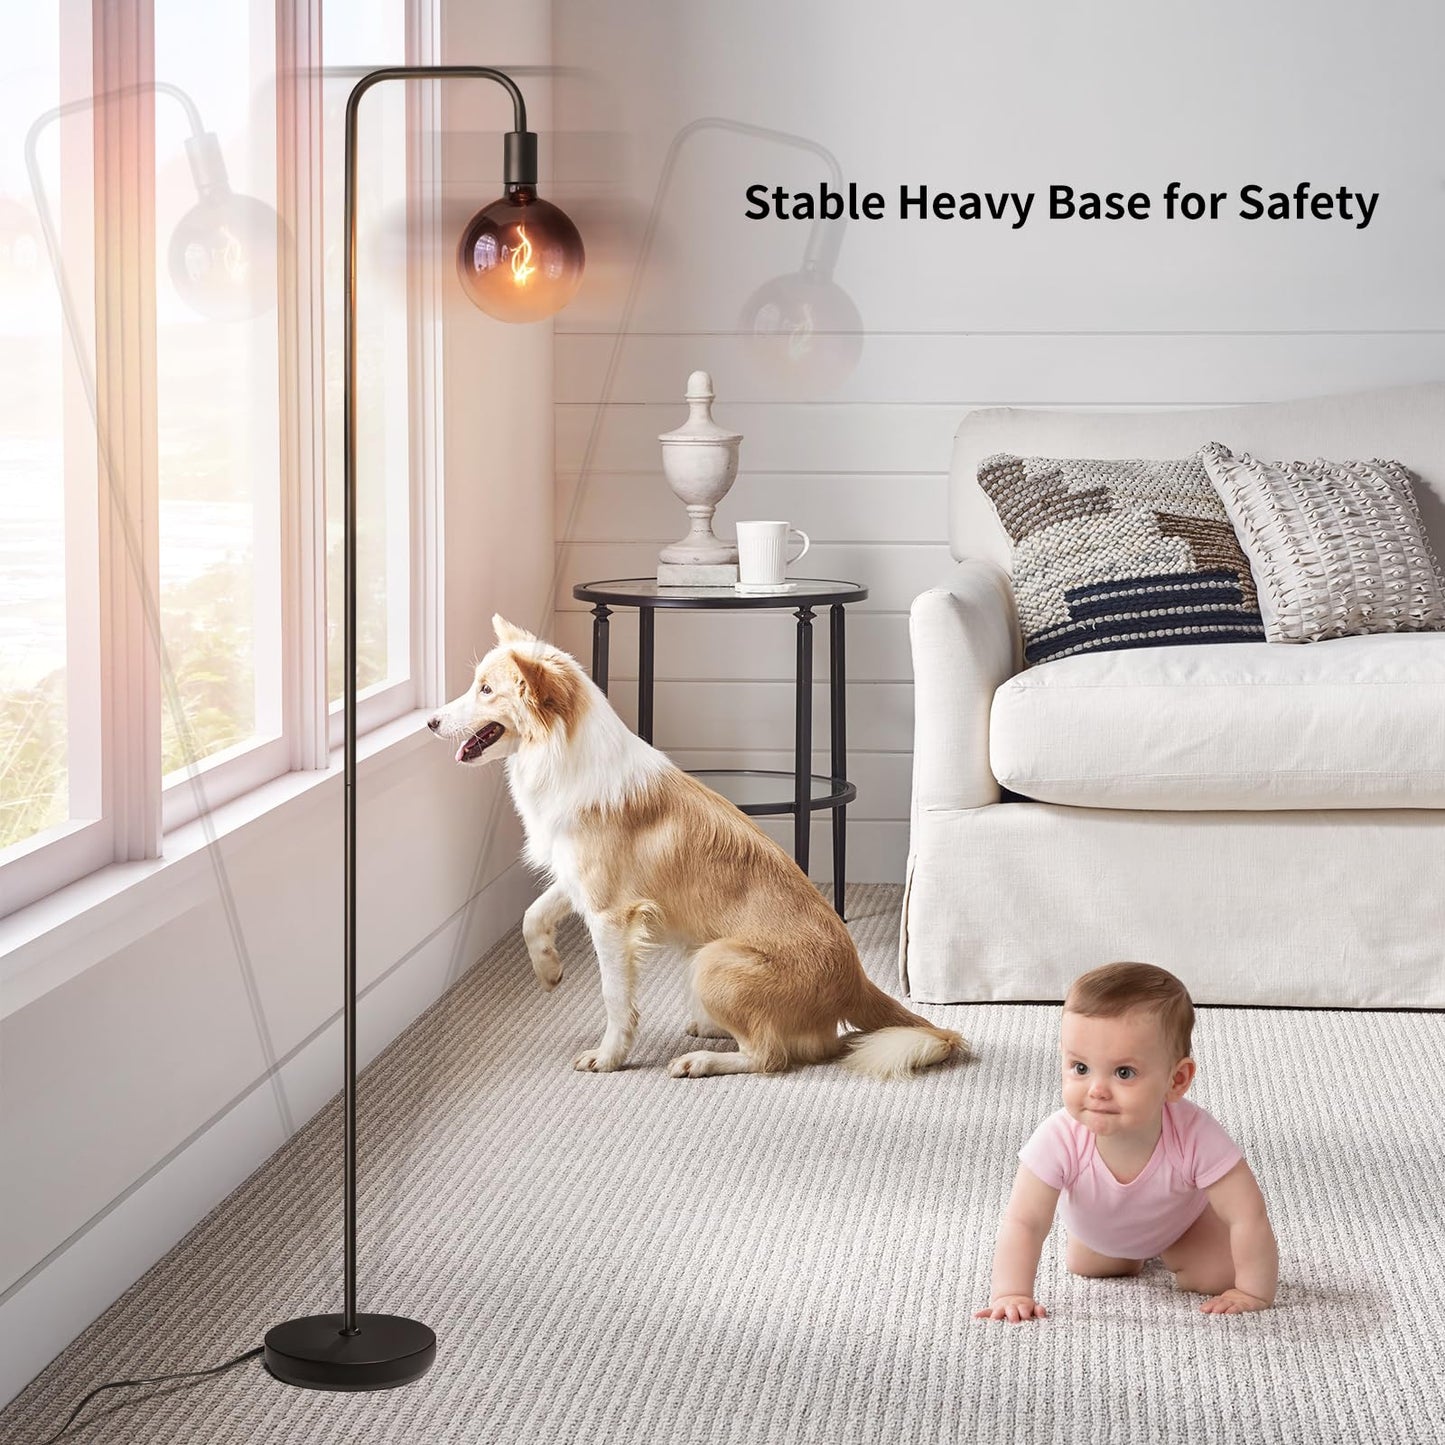 ONEWISH Floor Lamp Stable Heavy Base for Safety